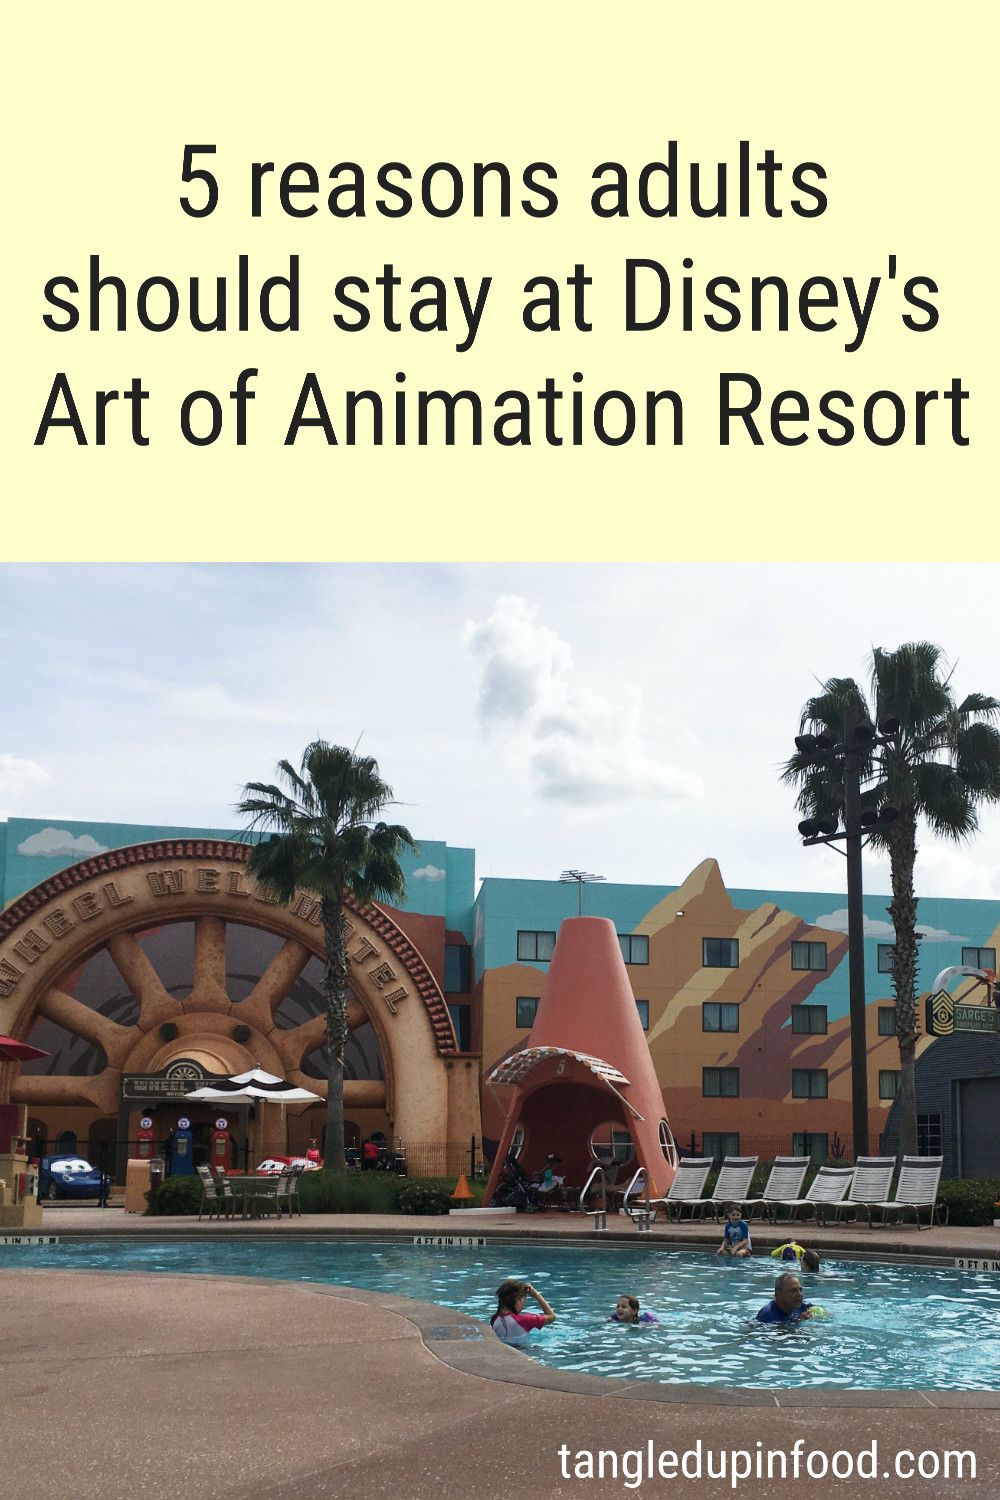 Picture of Disney's Cars-themed pool and text reading "5 reasons adults should stay at Disney's Art of Animation Resort"